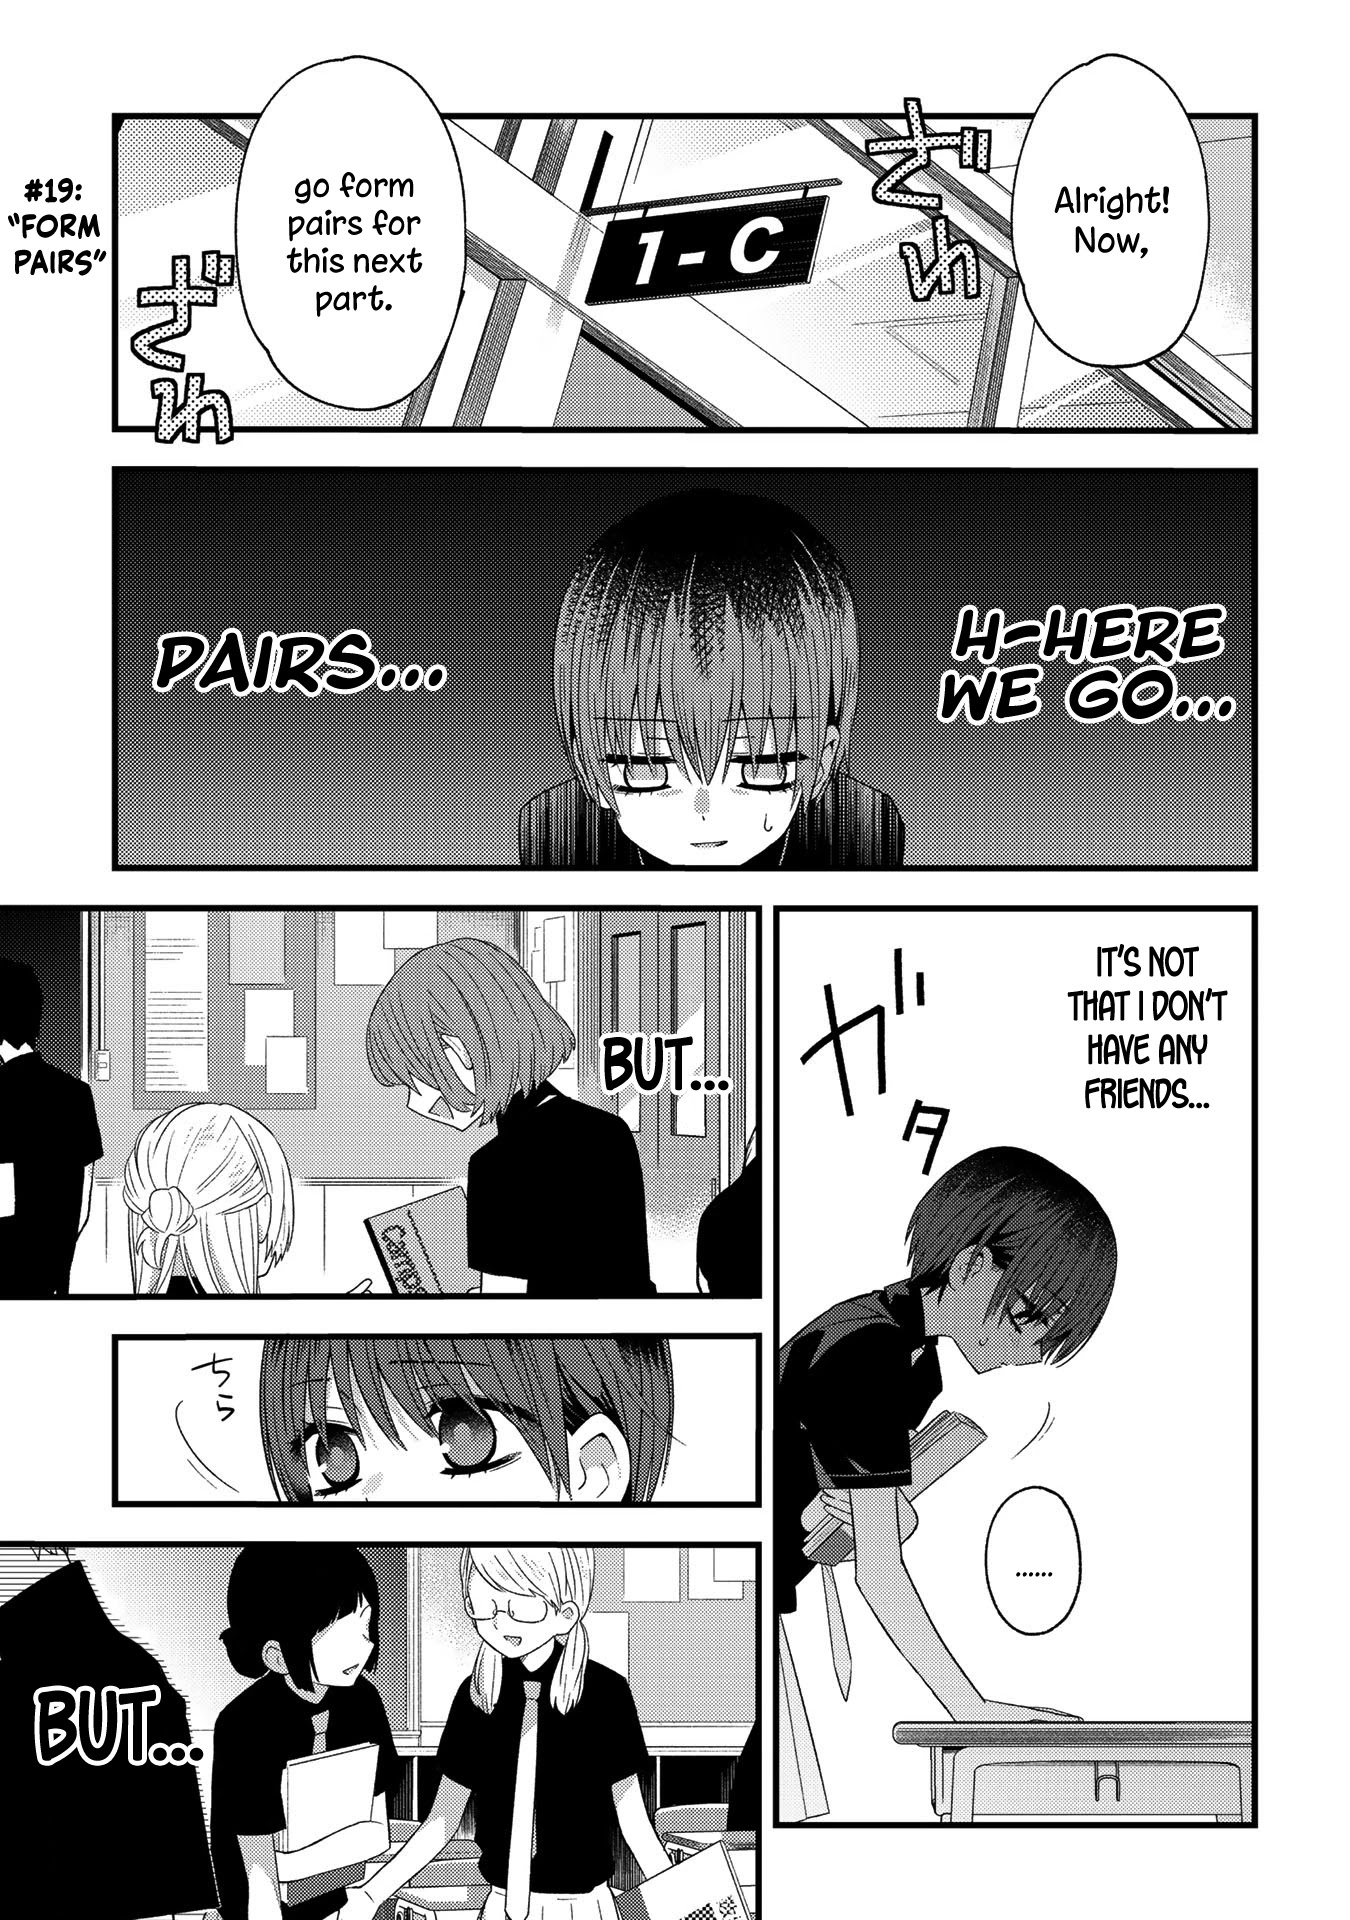 School Zone (Ningiyau) Chapter 19: Form Pairs - Picture 1